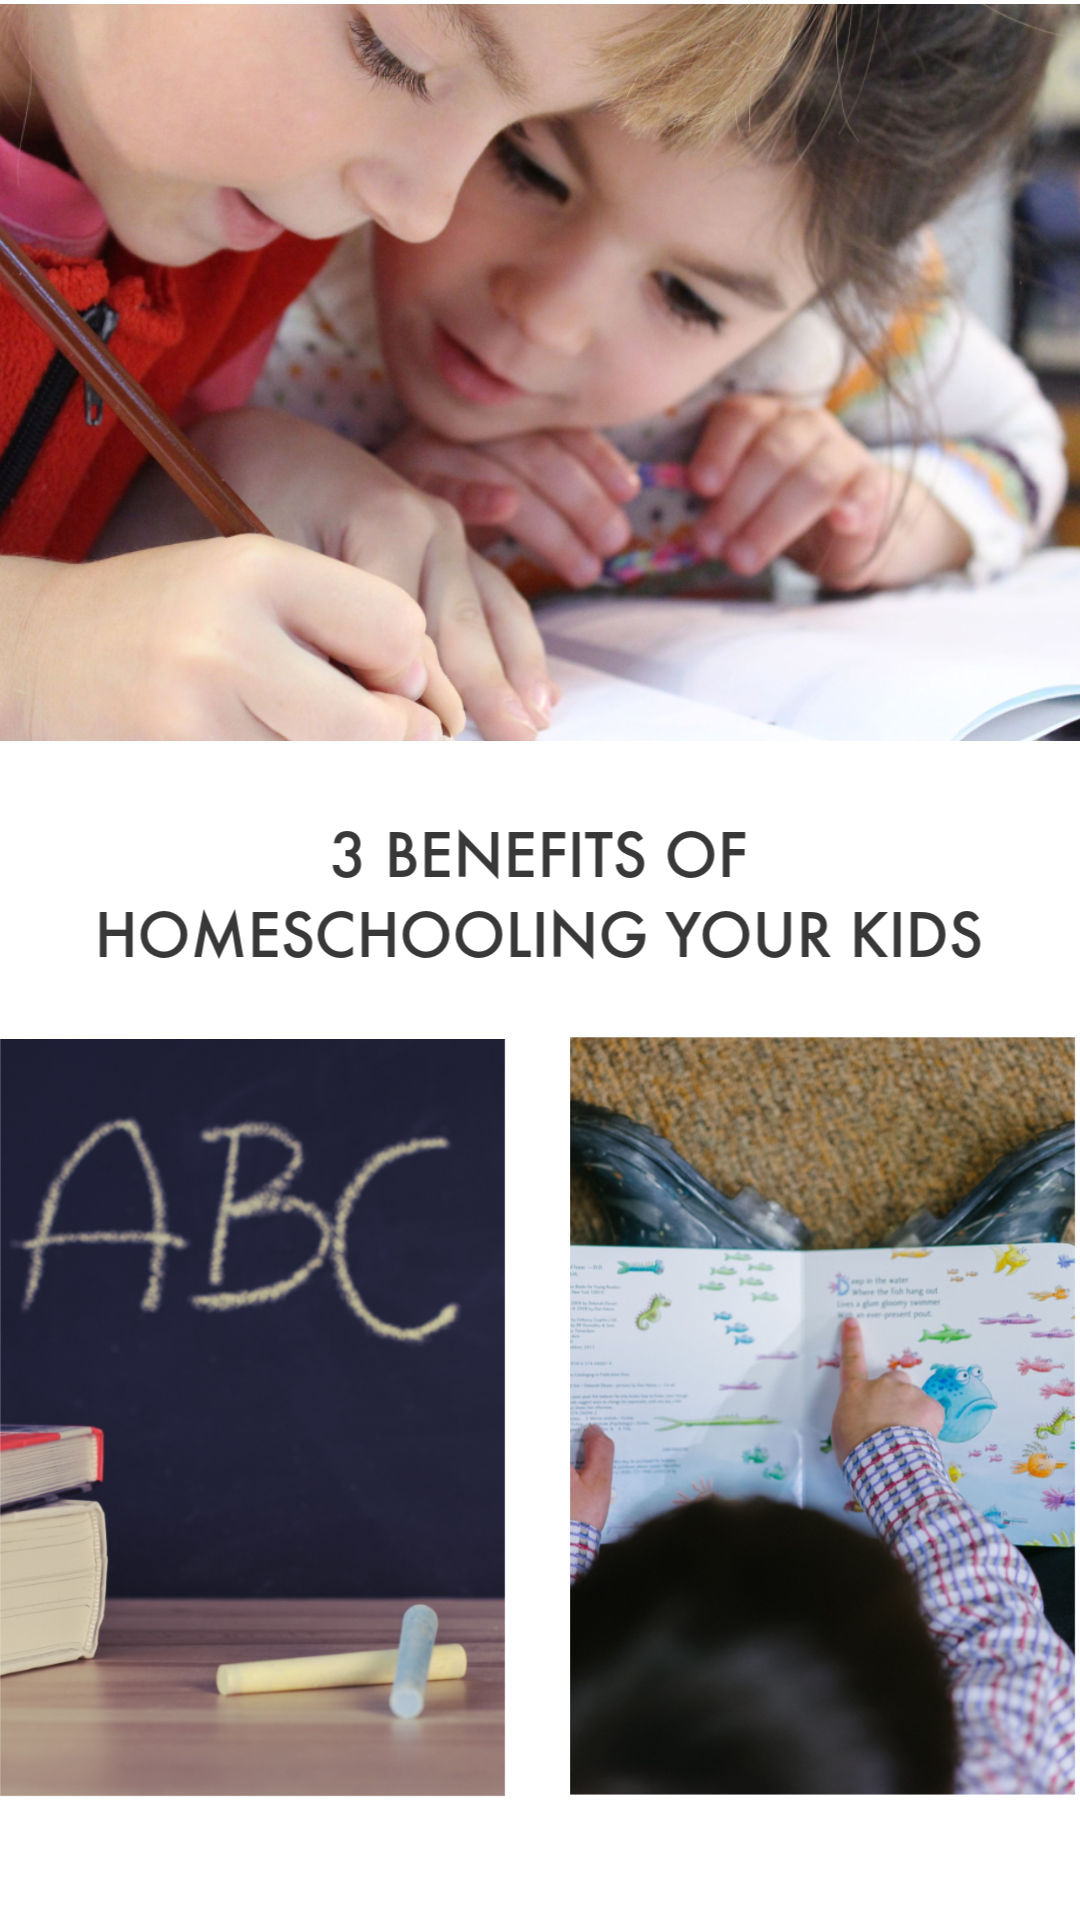 There are benefits for homeschooling your kids - and obviously it isn't for everyone, but we consider some of them to help you decide if its for you. #hoeschooling #kids #benefits #activities #school #education